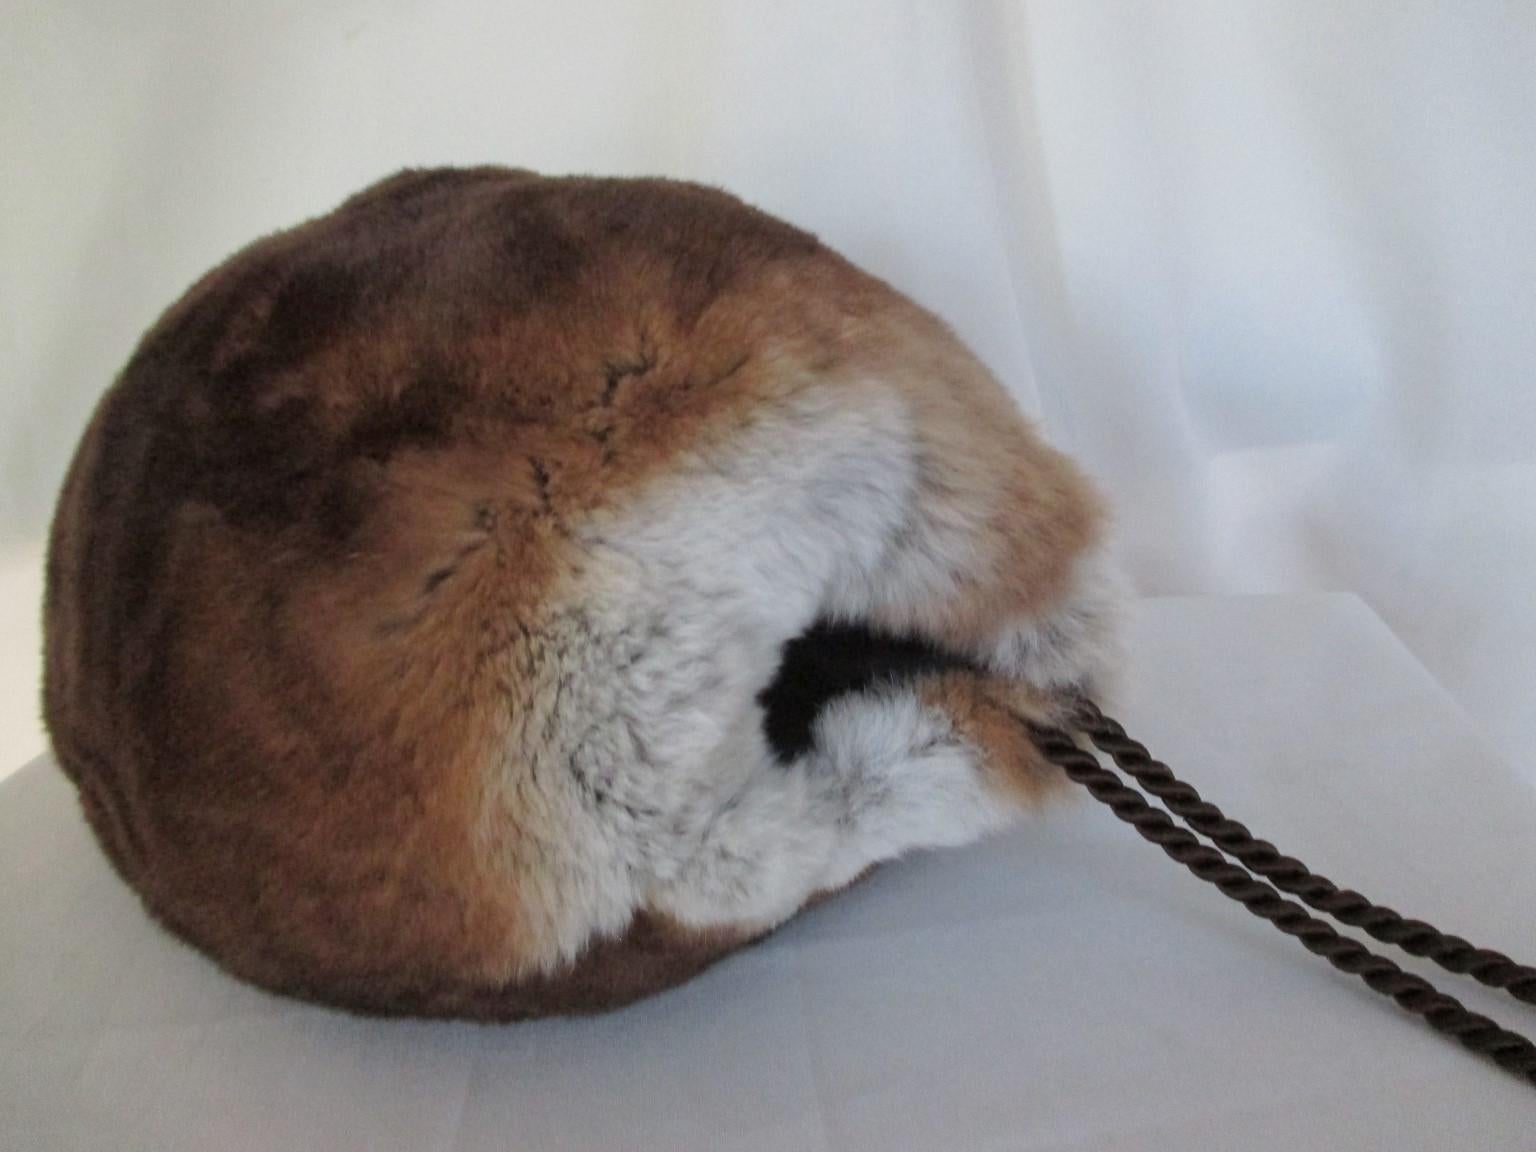 This brown soft chinchilla fur muff has 1 zipper pocket and 2 side opening for your hands for warming hands or wallet.
Its very light to wear and in very good vintage condition
Measurements:
lenght 27 cm / 10.62 inch
diameter 24 cm / 9.44 inch



